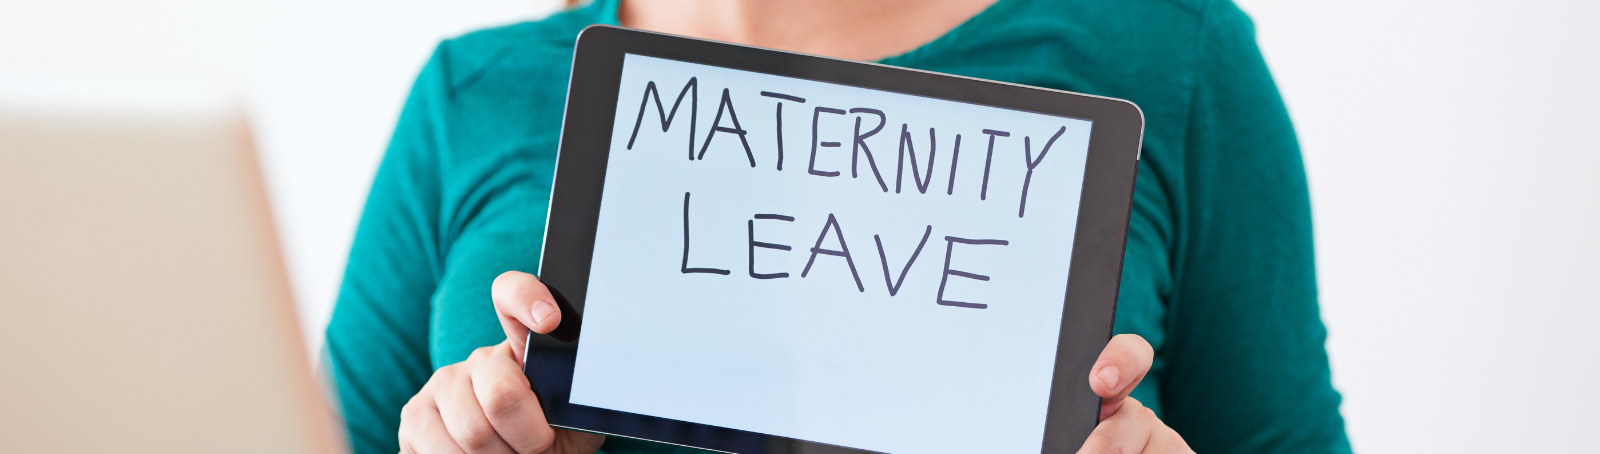 Maternity Leave Made Easy: How Pimaccounting’s Innovative Solutions Support Your Business Through Company Registration and Beyond